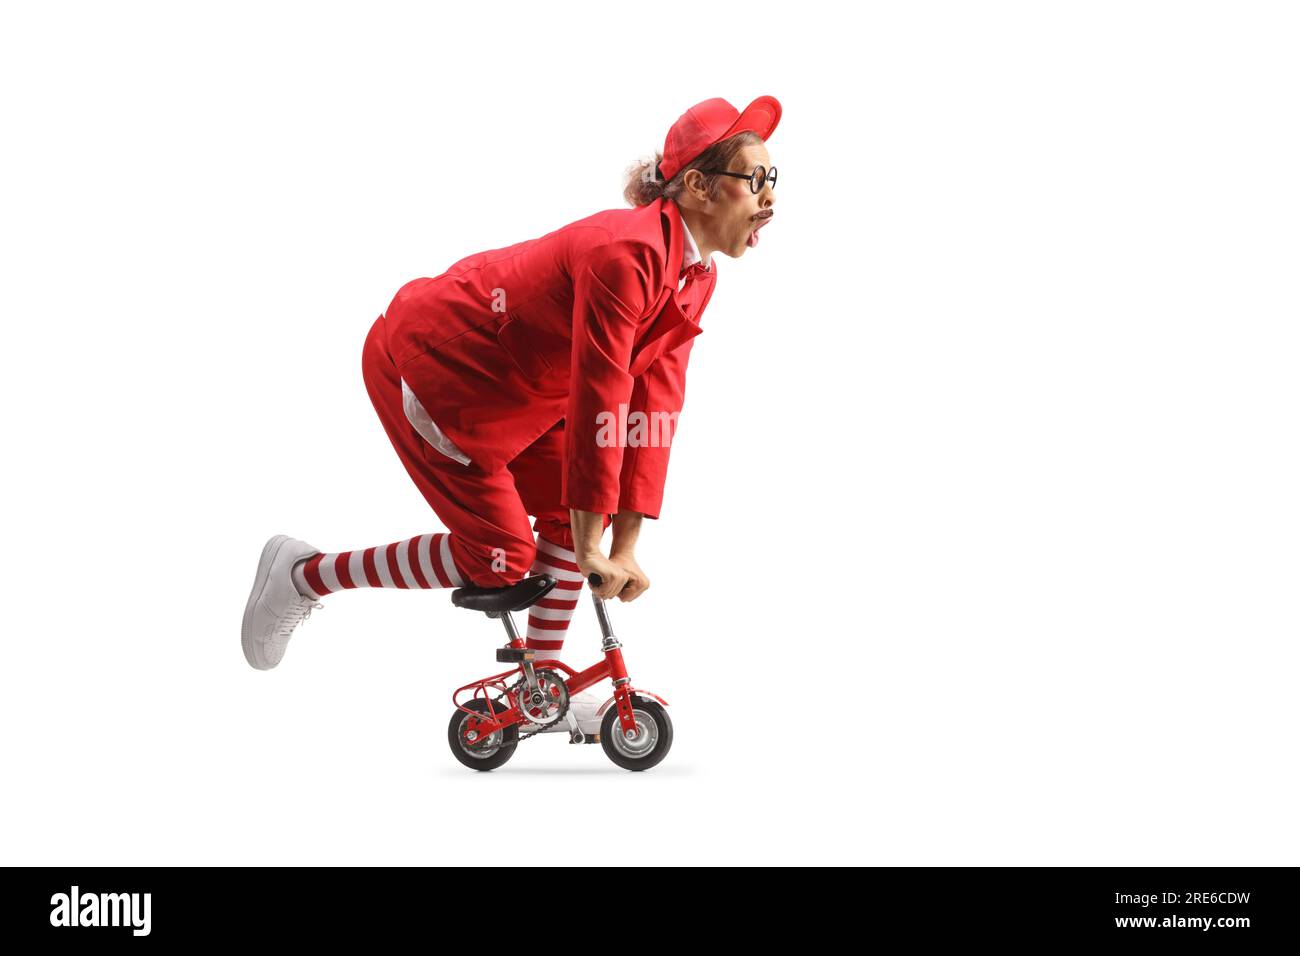 Funny entertainer in a red suit riding a small bike isolated on white background Stock Photo